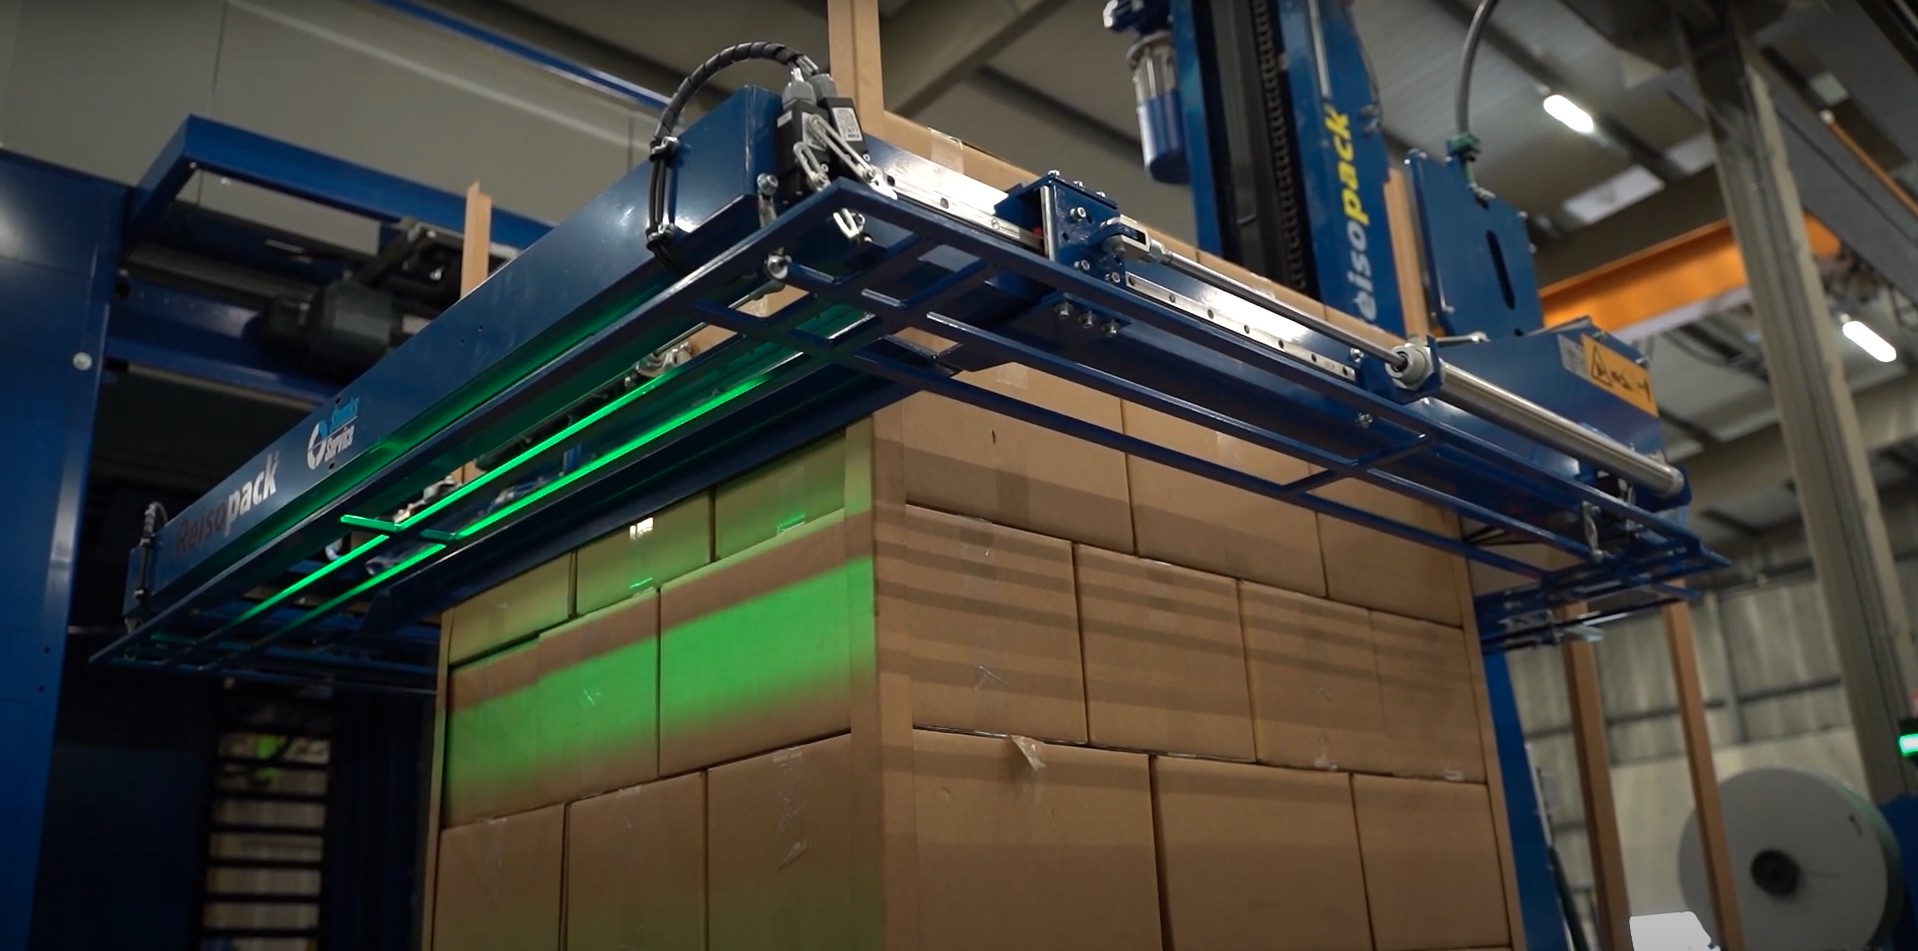 Stacking food boxes with a palletizing machine